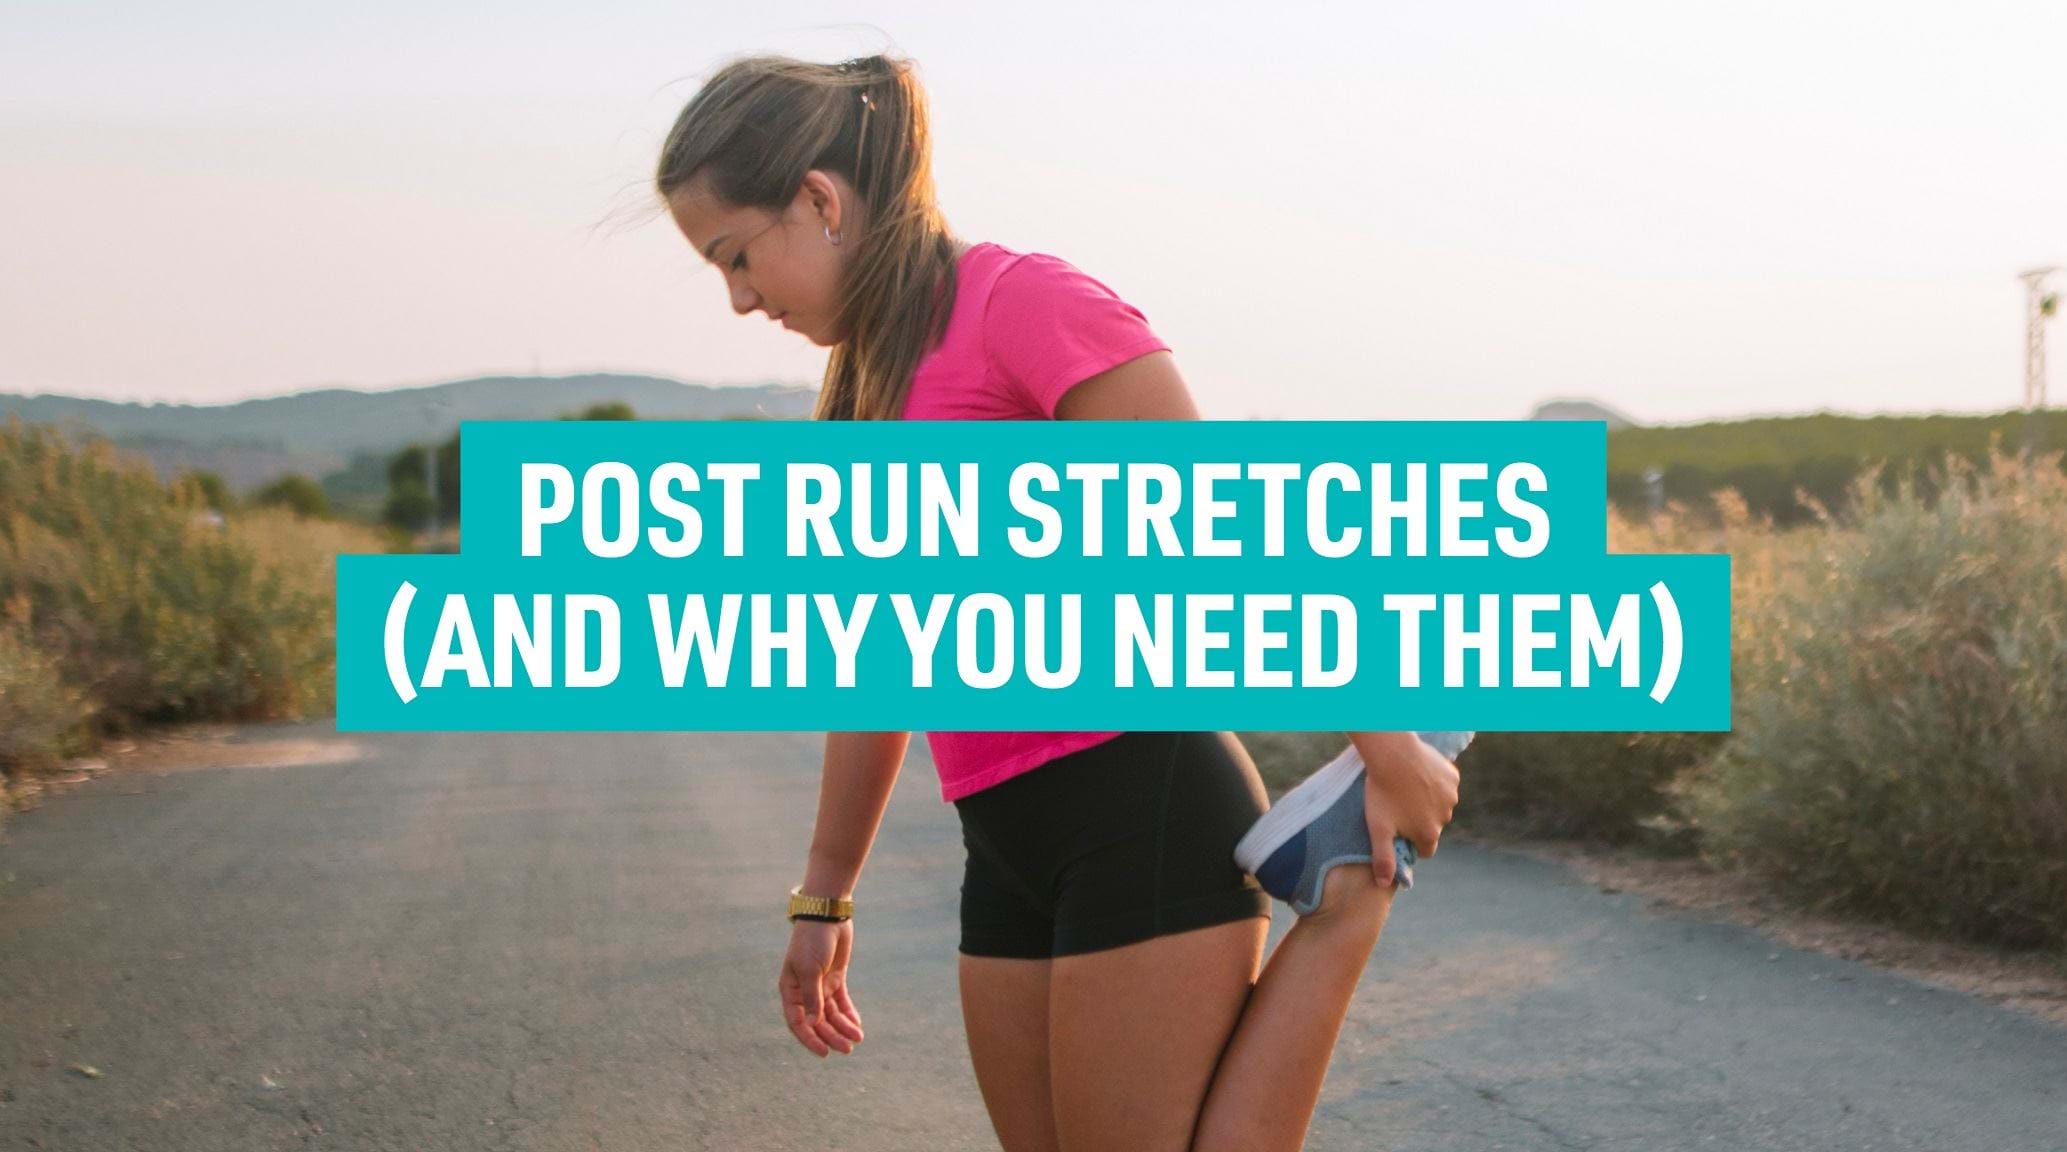 Post-Run Stretches (And Why They're So Important)